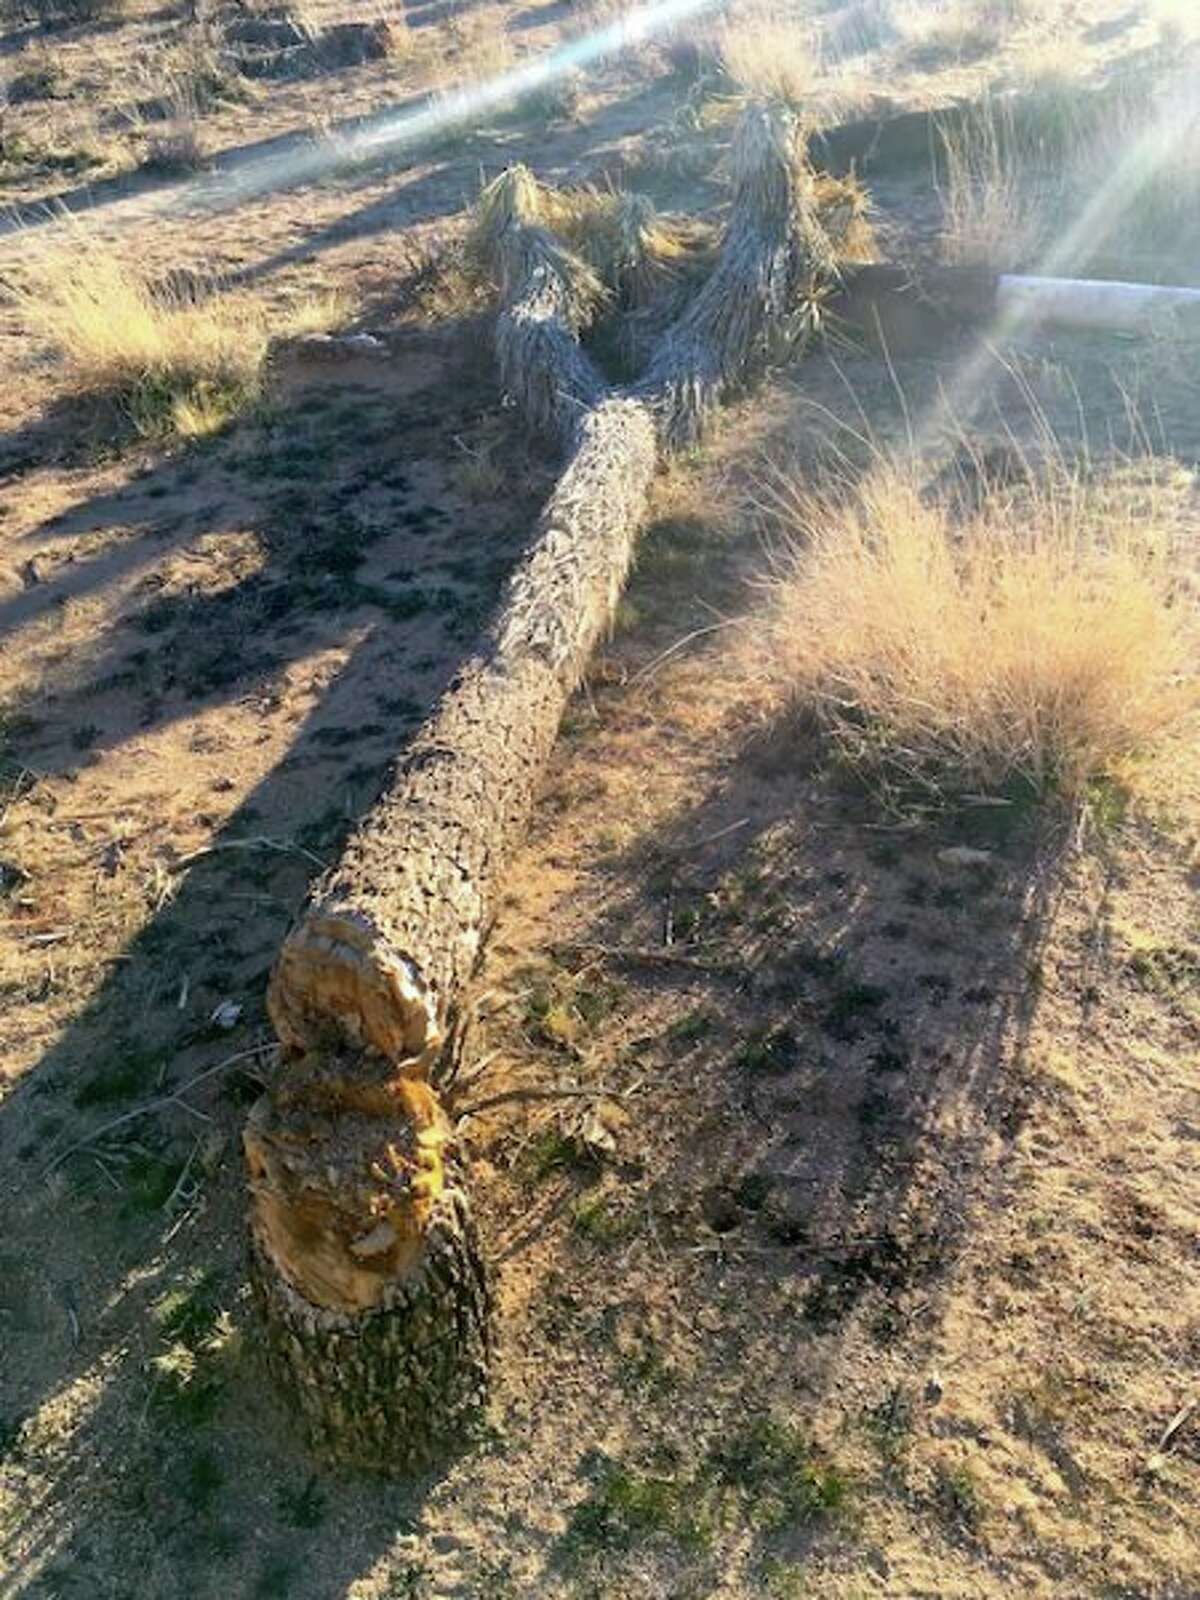 A picture provided by the National Park Service shows a felled Joshua tree at Joshua Tree National Park. The park sustained extra damage during the partial government shutdown.